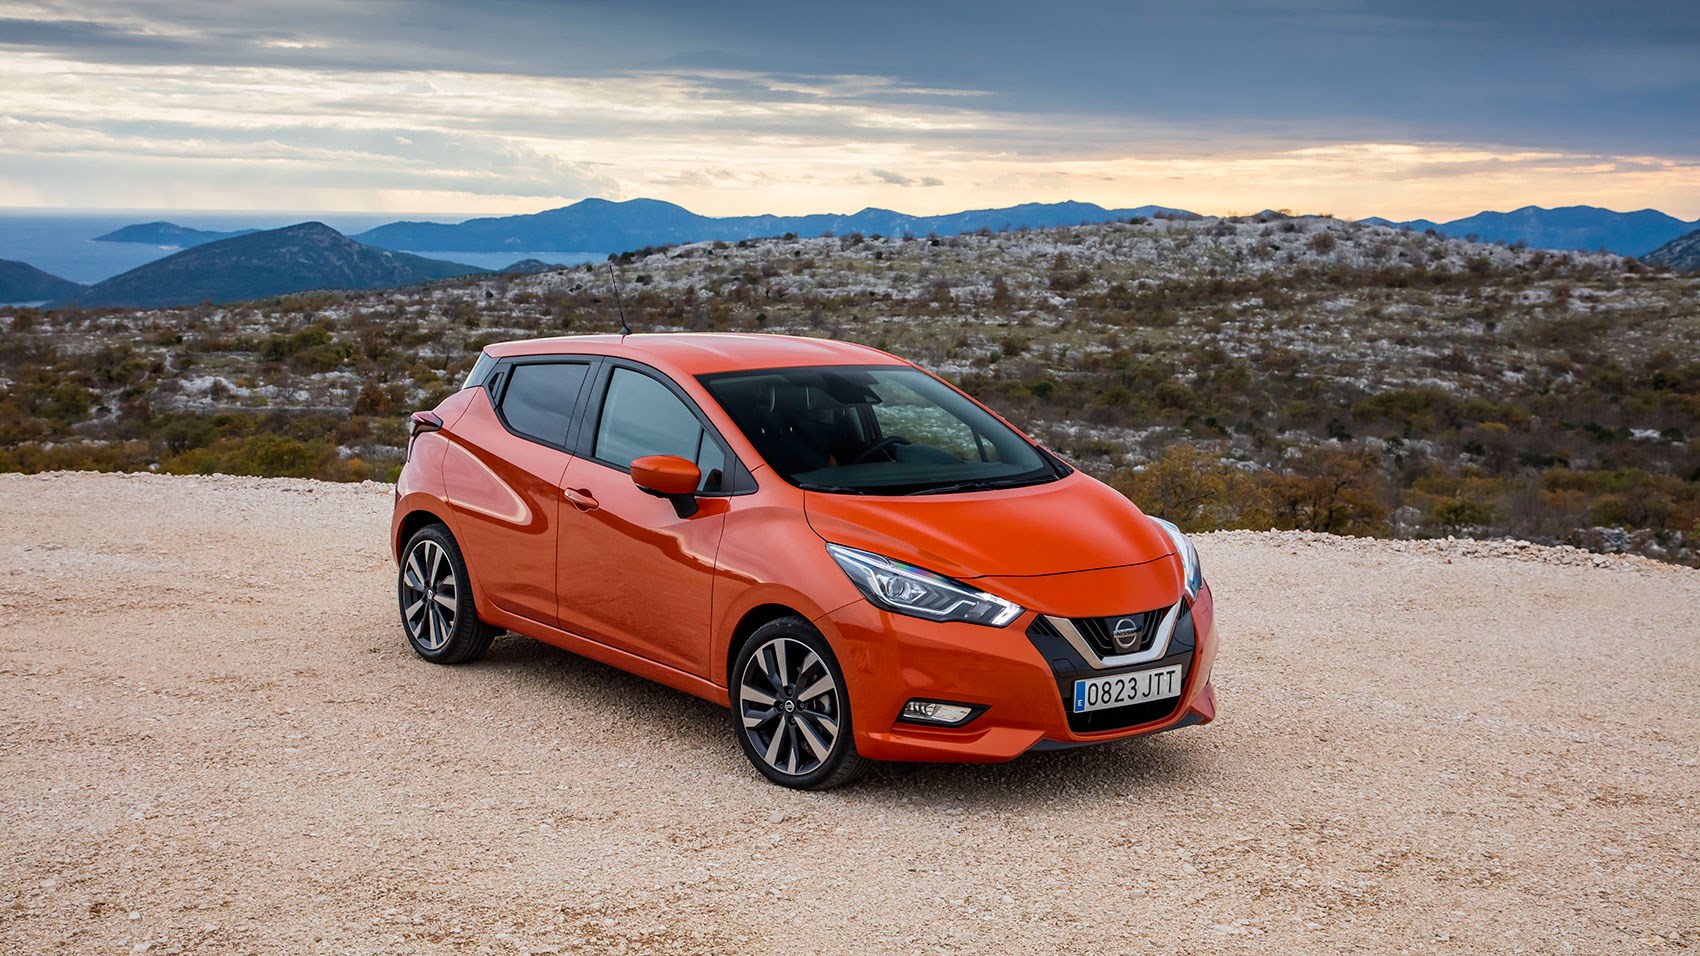 2017 Nissan Micra review: Oh, Canada, here's your next Nissan Micra - CNET